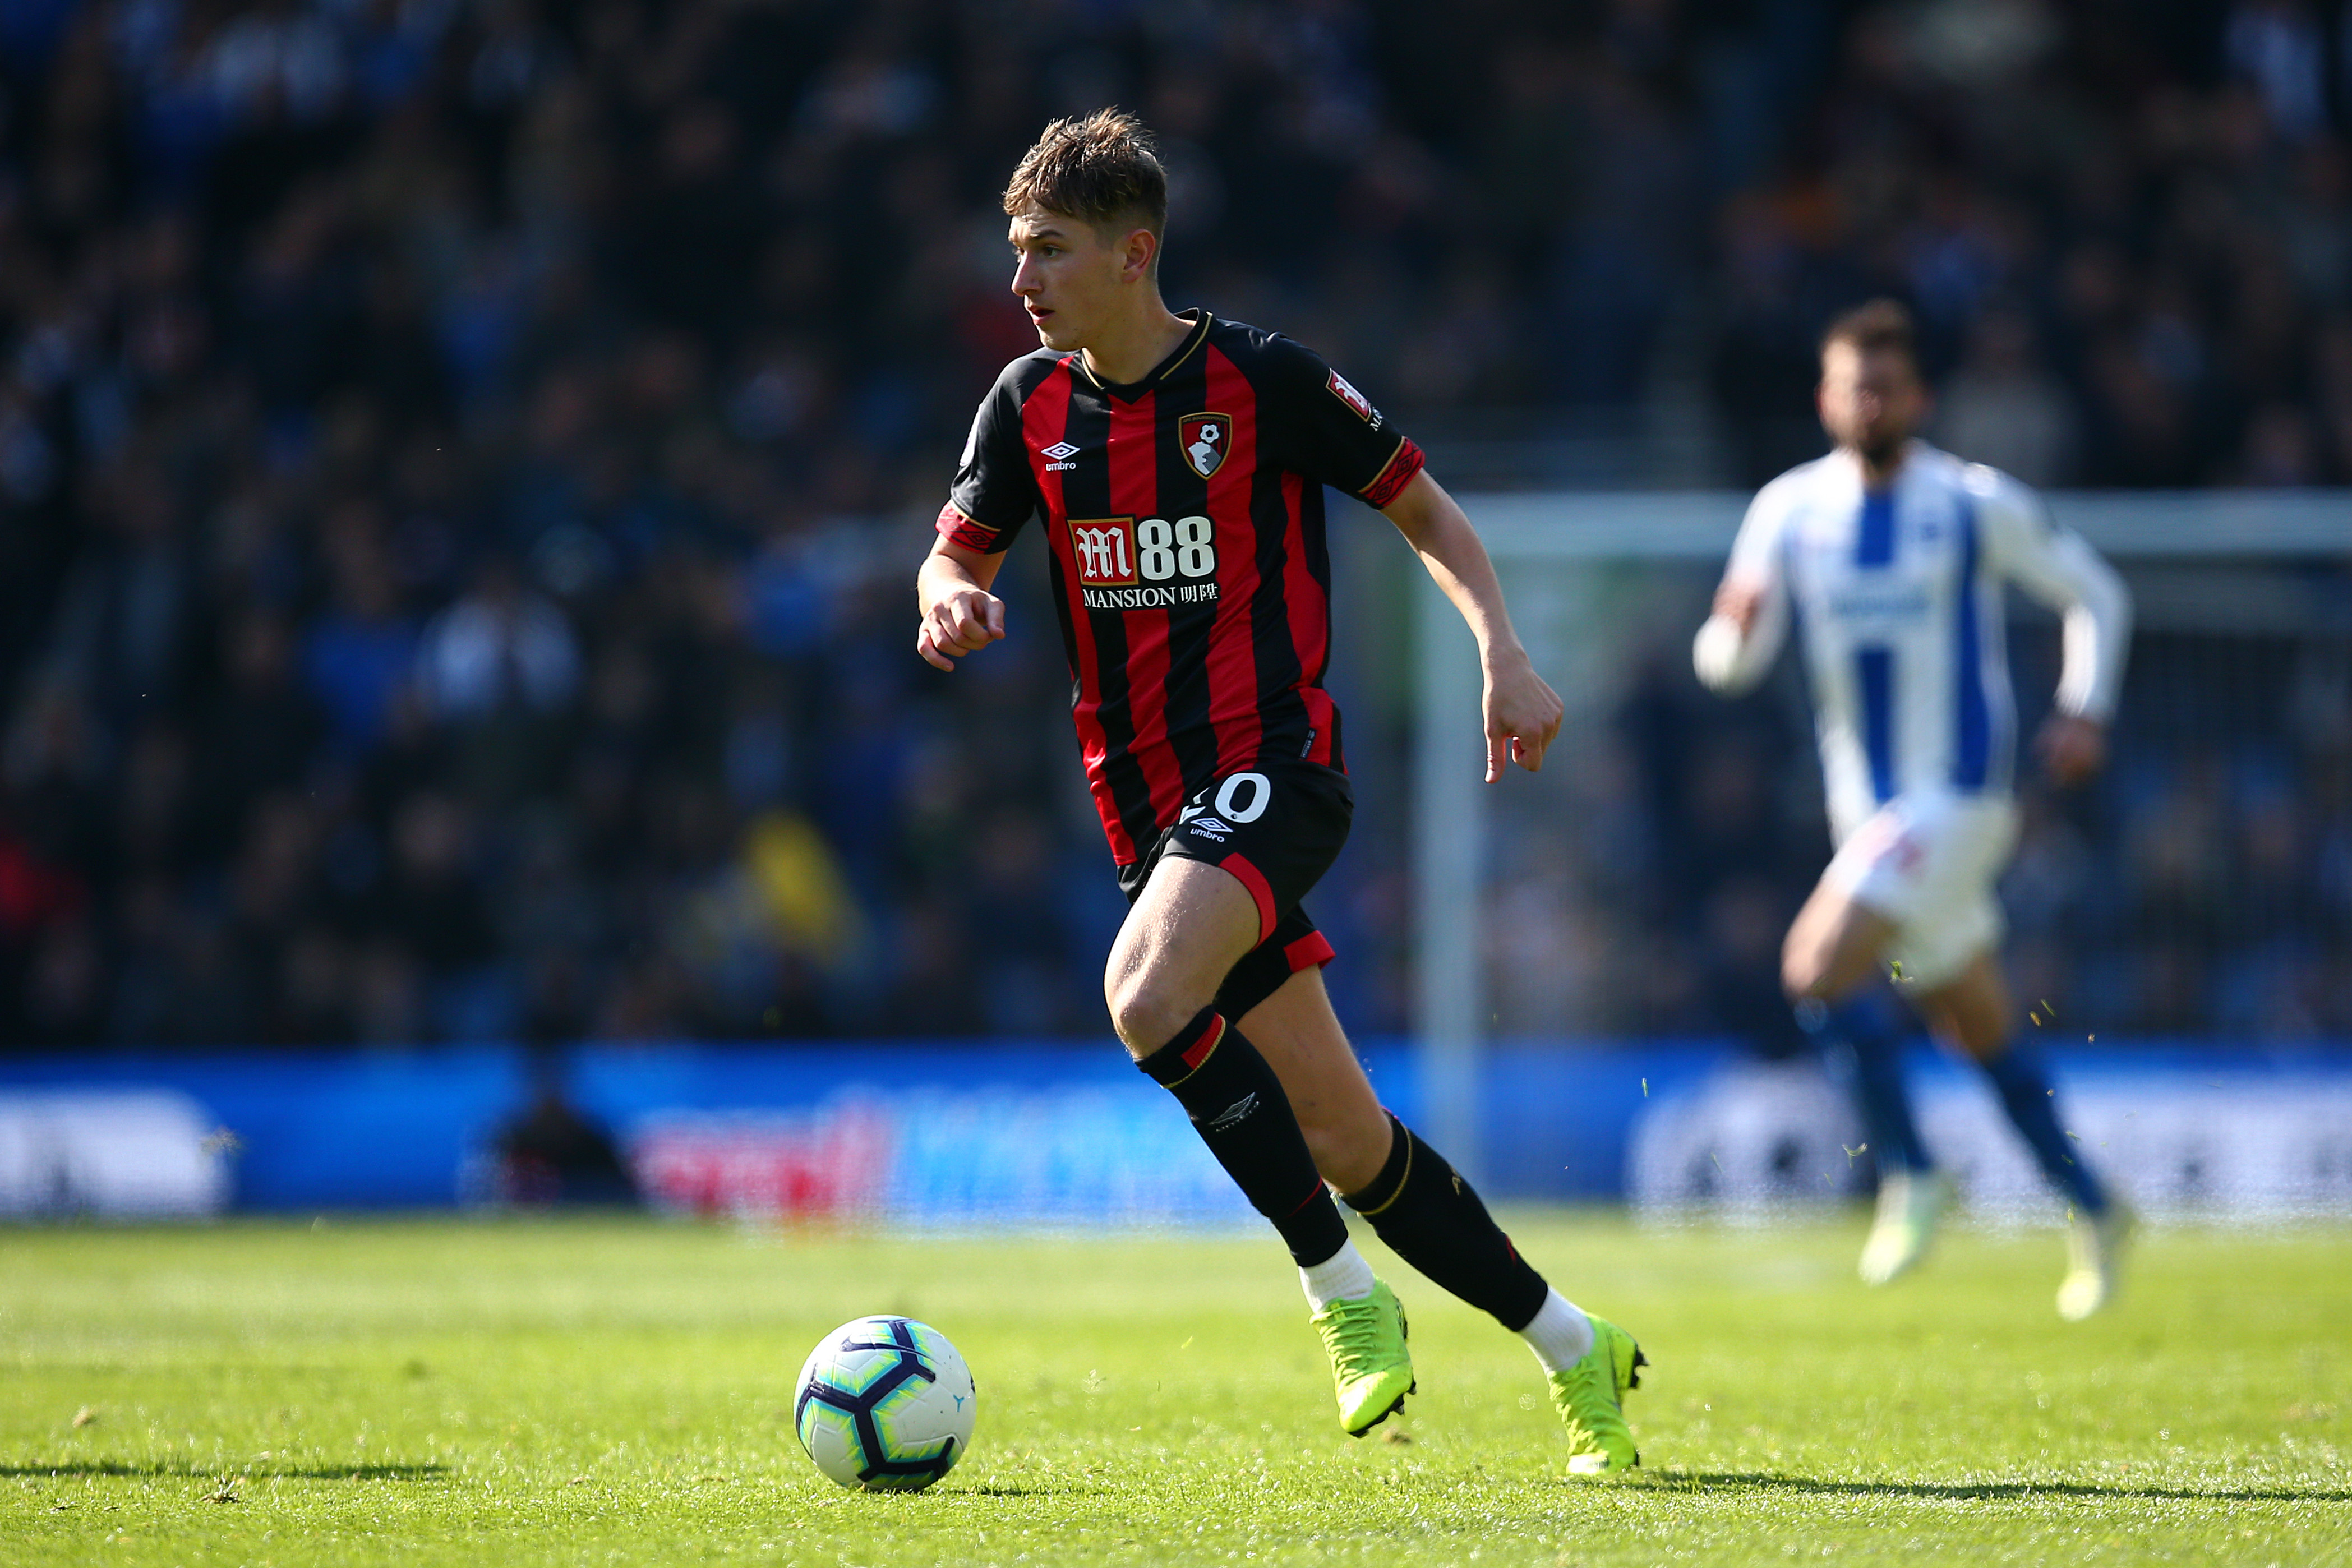 BRIGHTON, ENGLAND - APRIL 13: David Brooks of Bournemouth attacks during the Premier League match between Brighton & Hove Albion and AFC Bournemouth at American Express Community Stadium on April 13, 2019 in Brighton, United Kingdom. (Photo by Charlie Crowhurst/Getty Images)